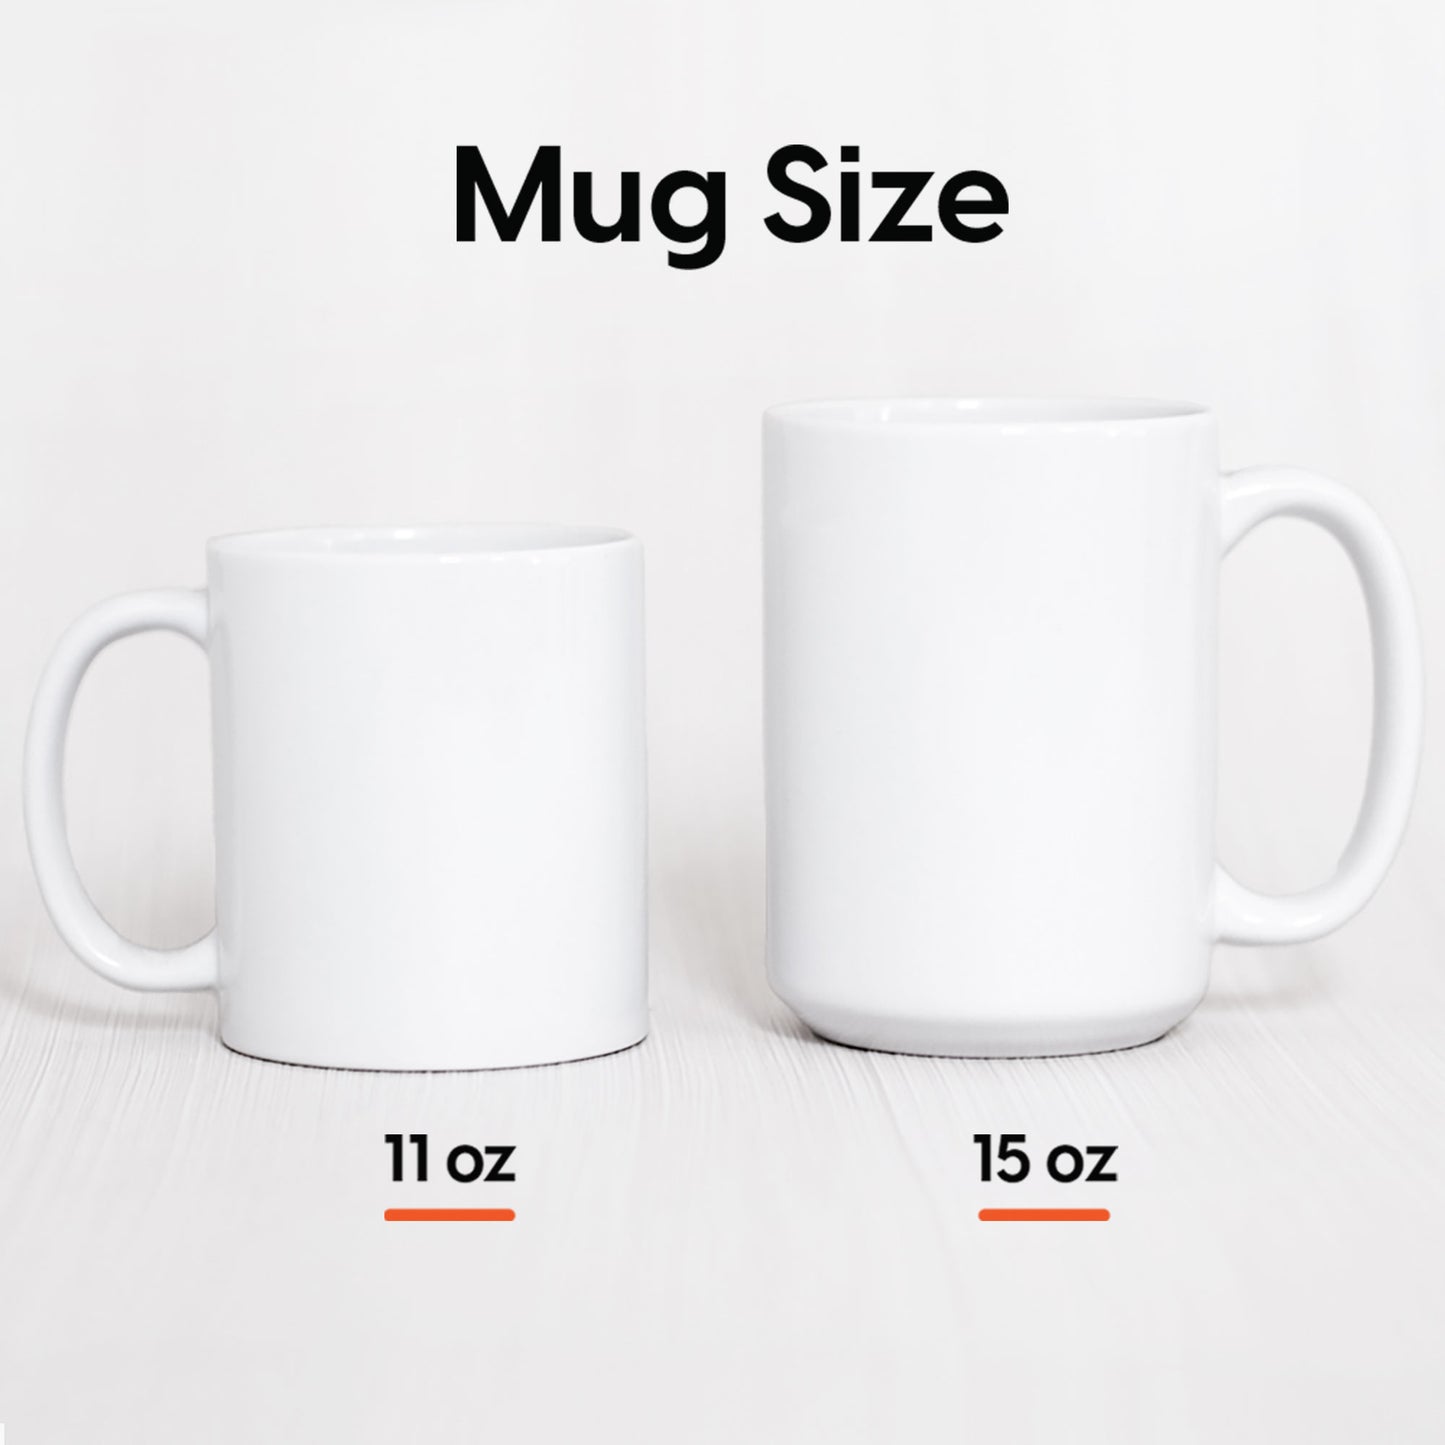 Squad Goals  - Personalized Mug - Gift For Friends